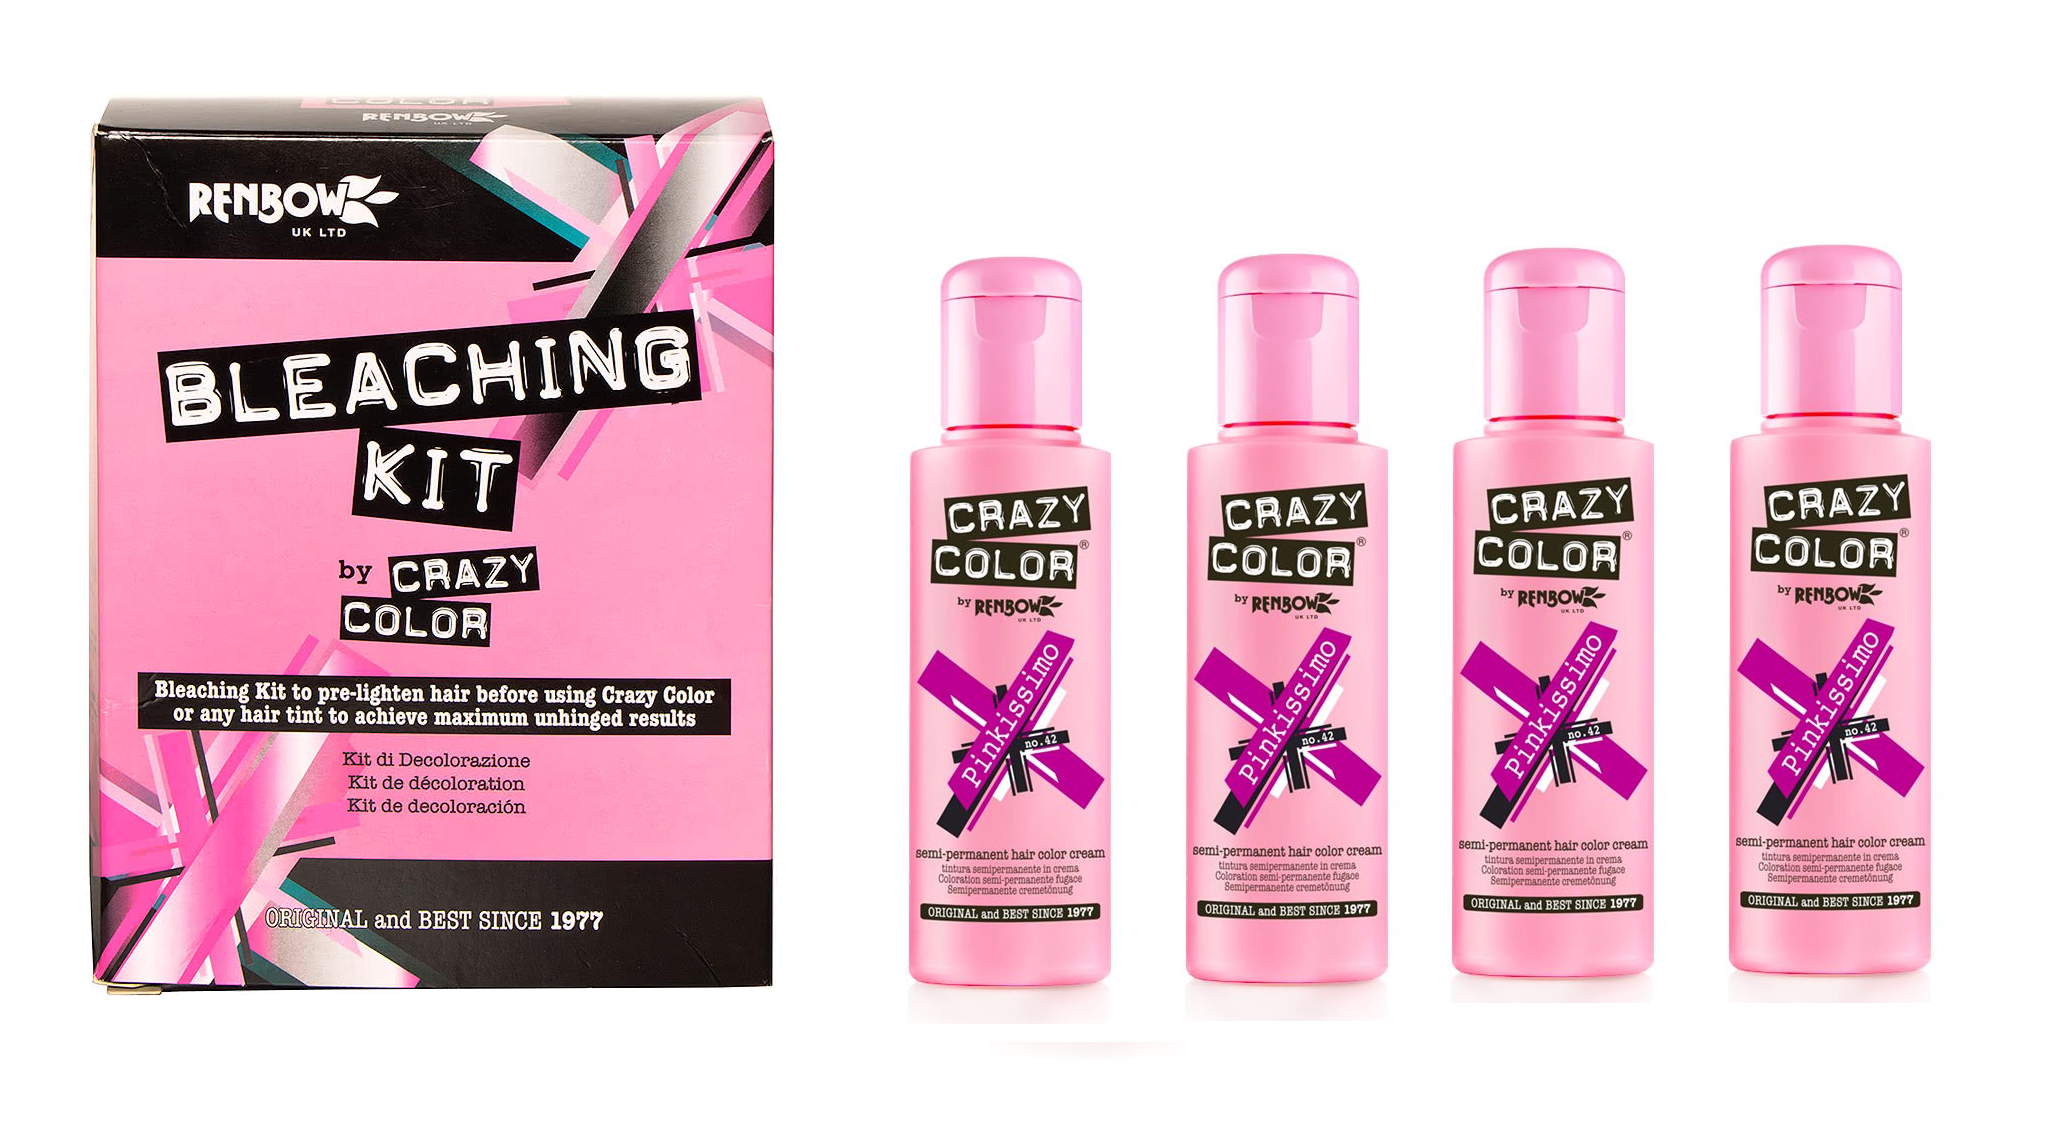 Crazy Color Hair Dye 100ml – Pinkissimo x4 and Bleaching Kit